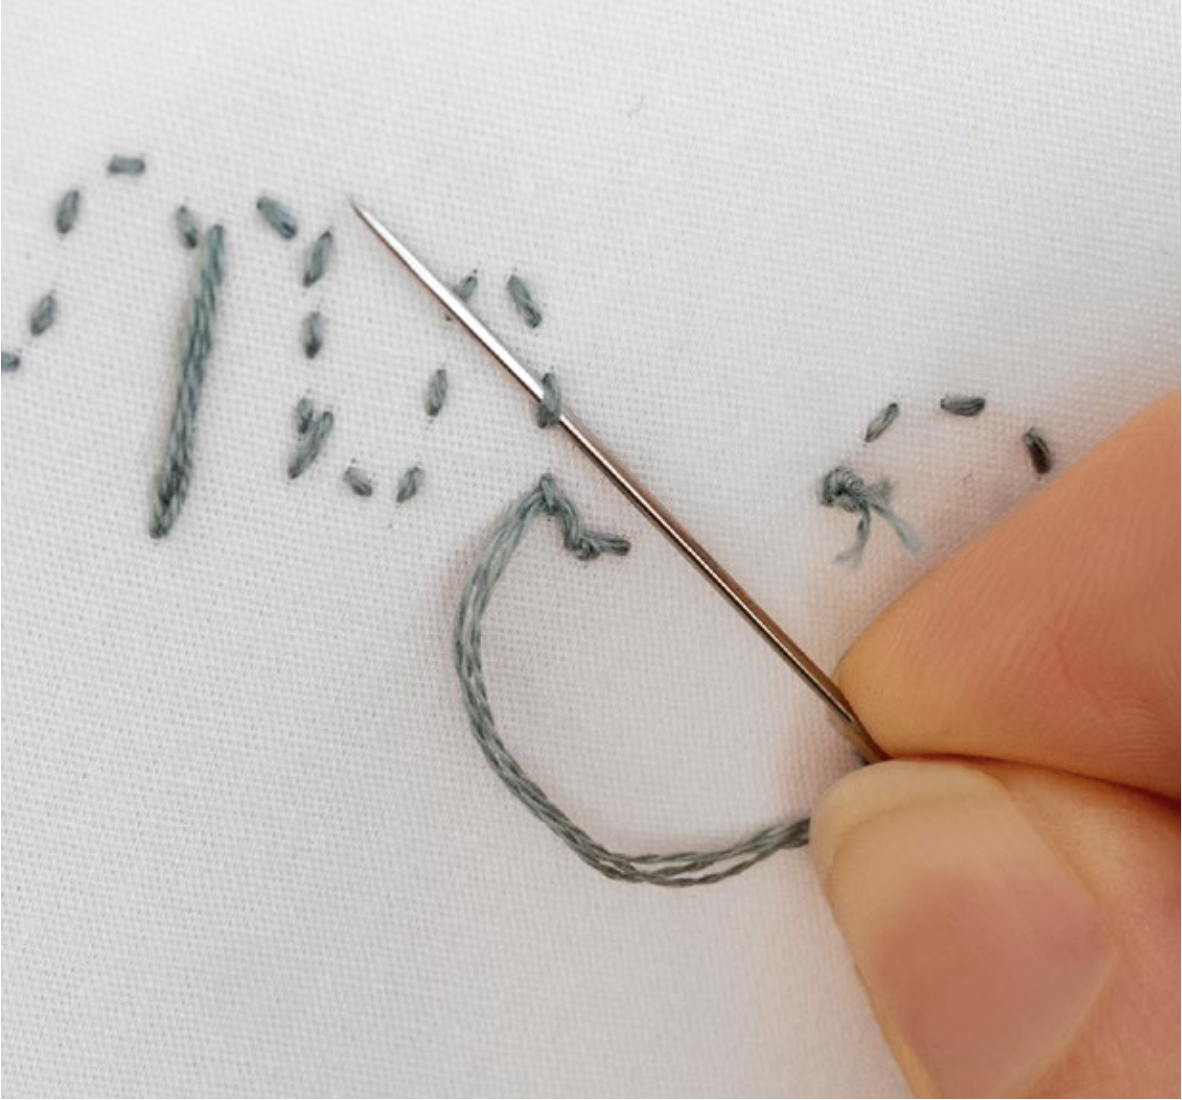 An embroidery needle goes under the back of a stitch.